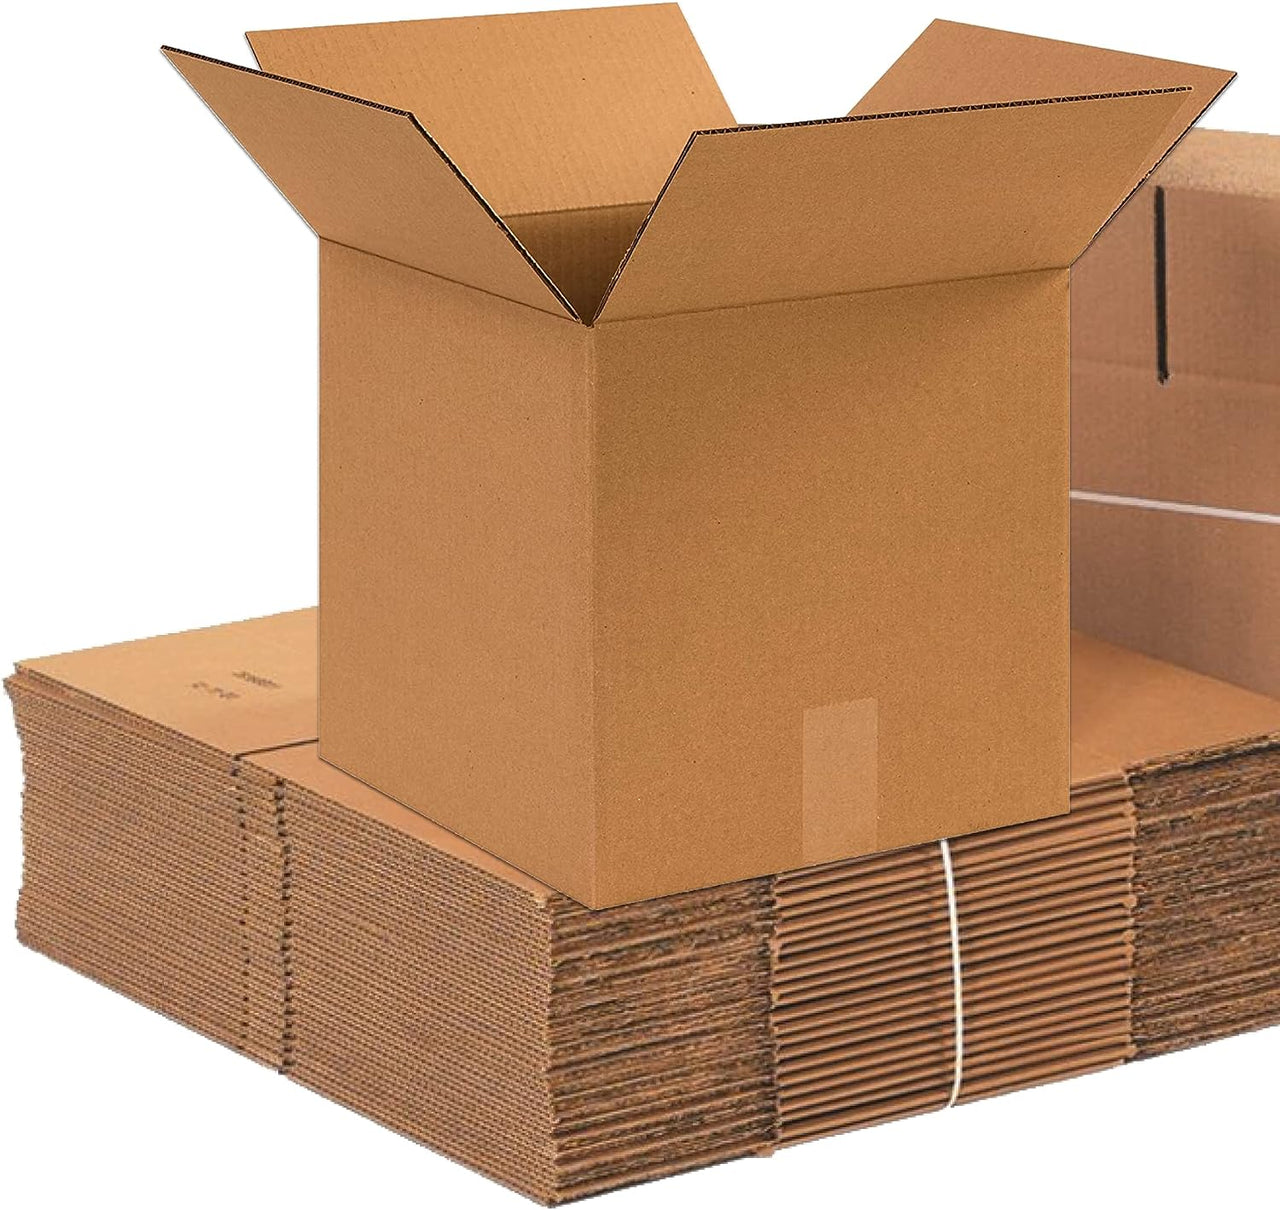 10 Pack Shipping Boxes 16"L x 16"W x 16"H Corrugated Cardboard Box for Packing Moving Storage